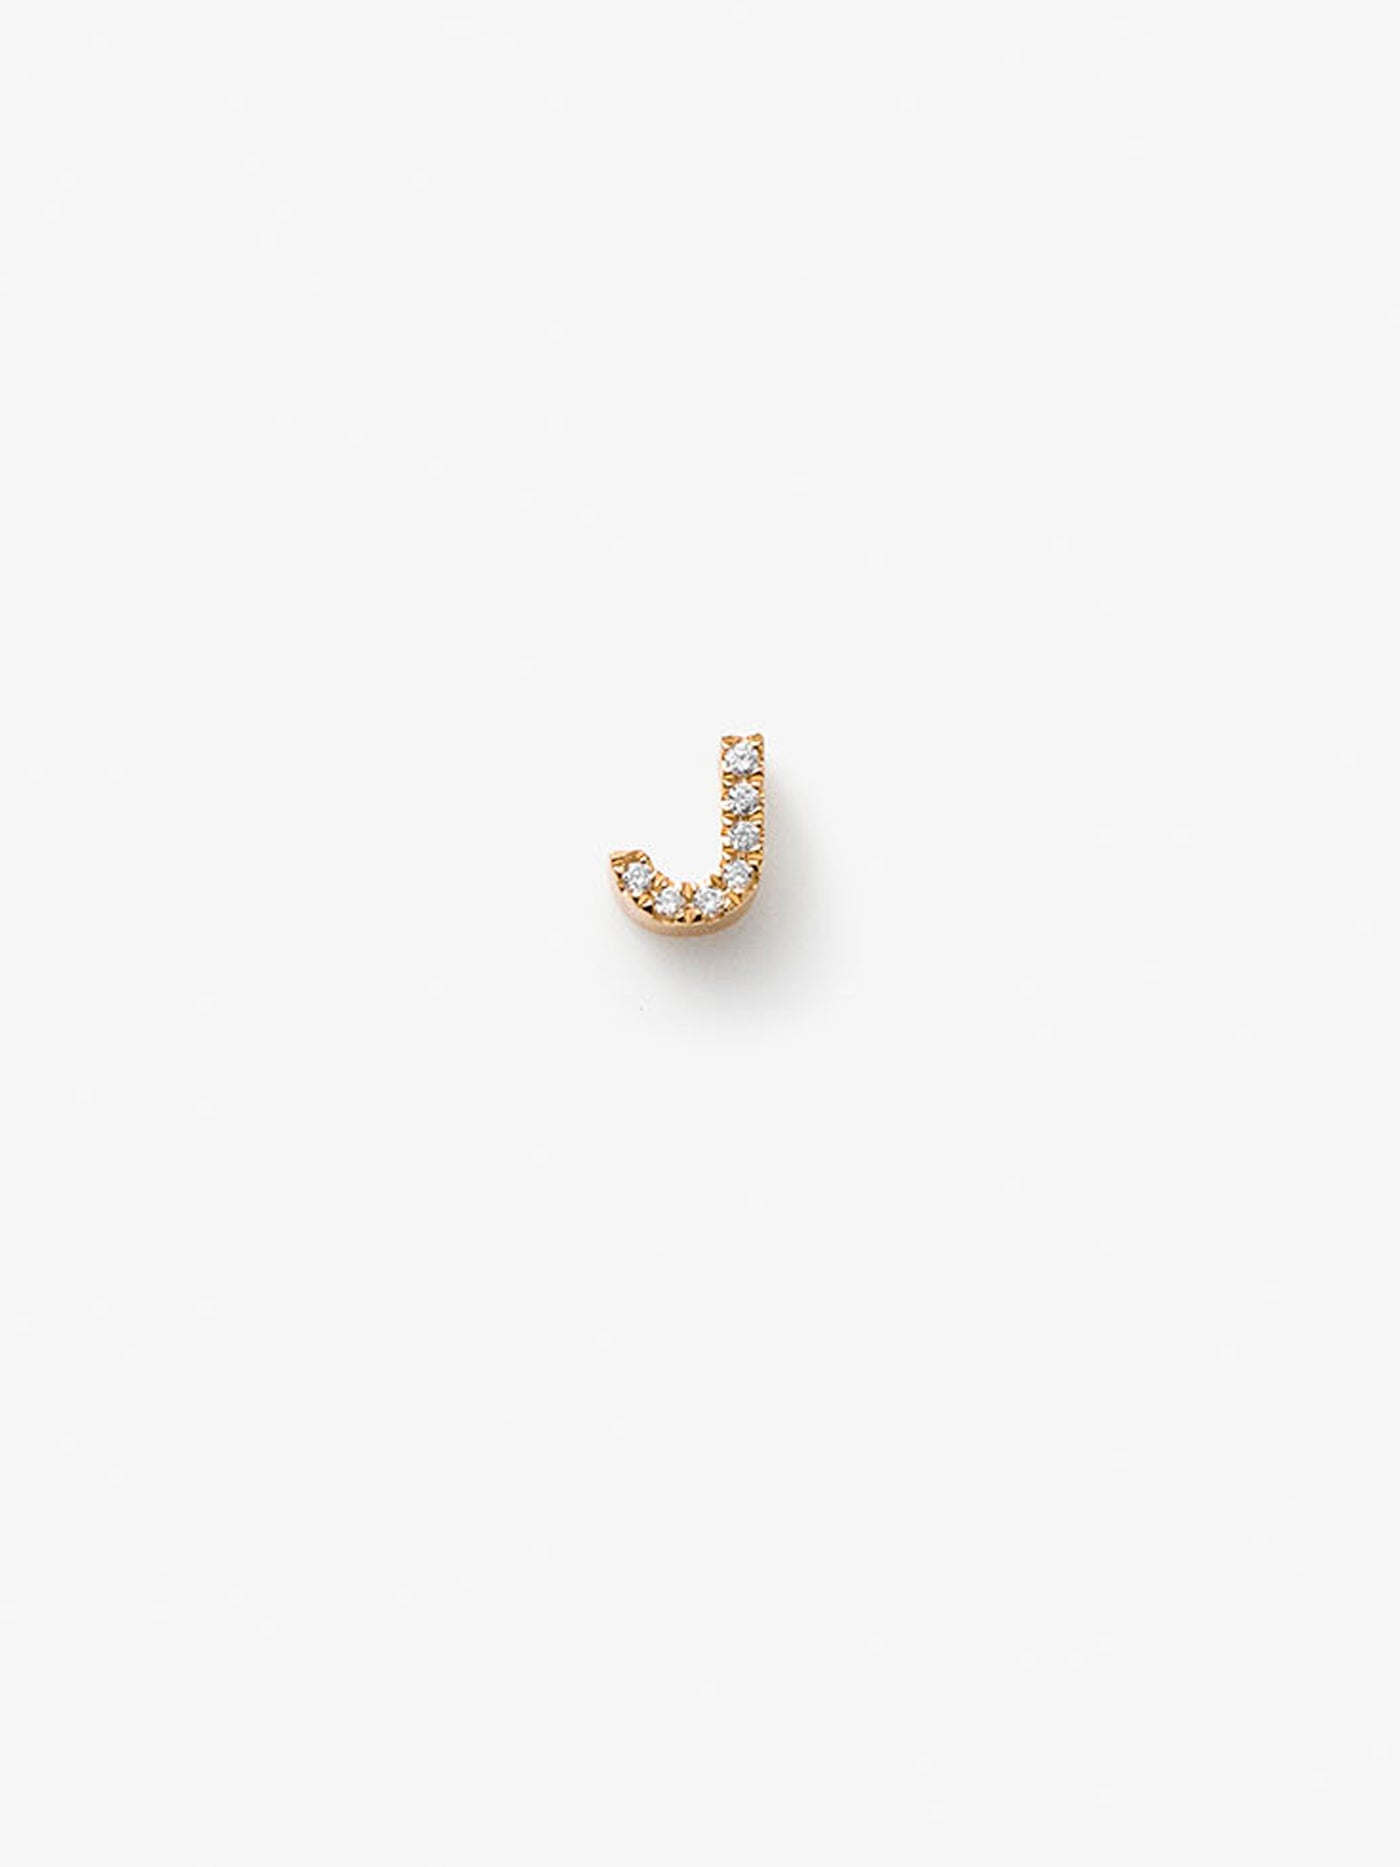 Letter J in Diamonds and 18k Gold